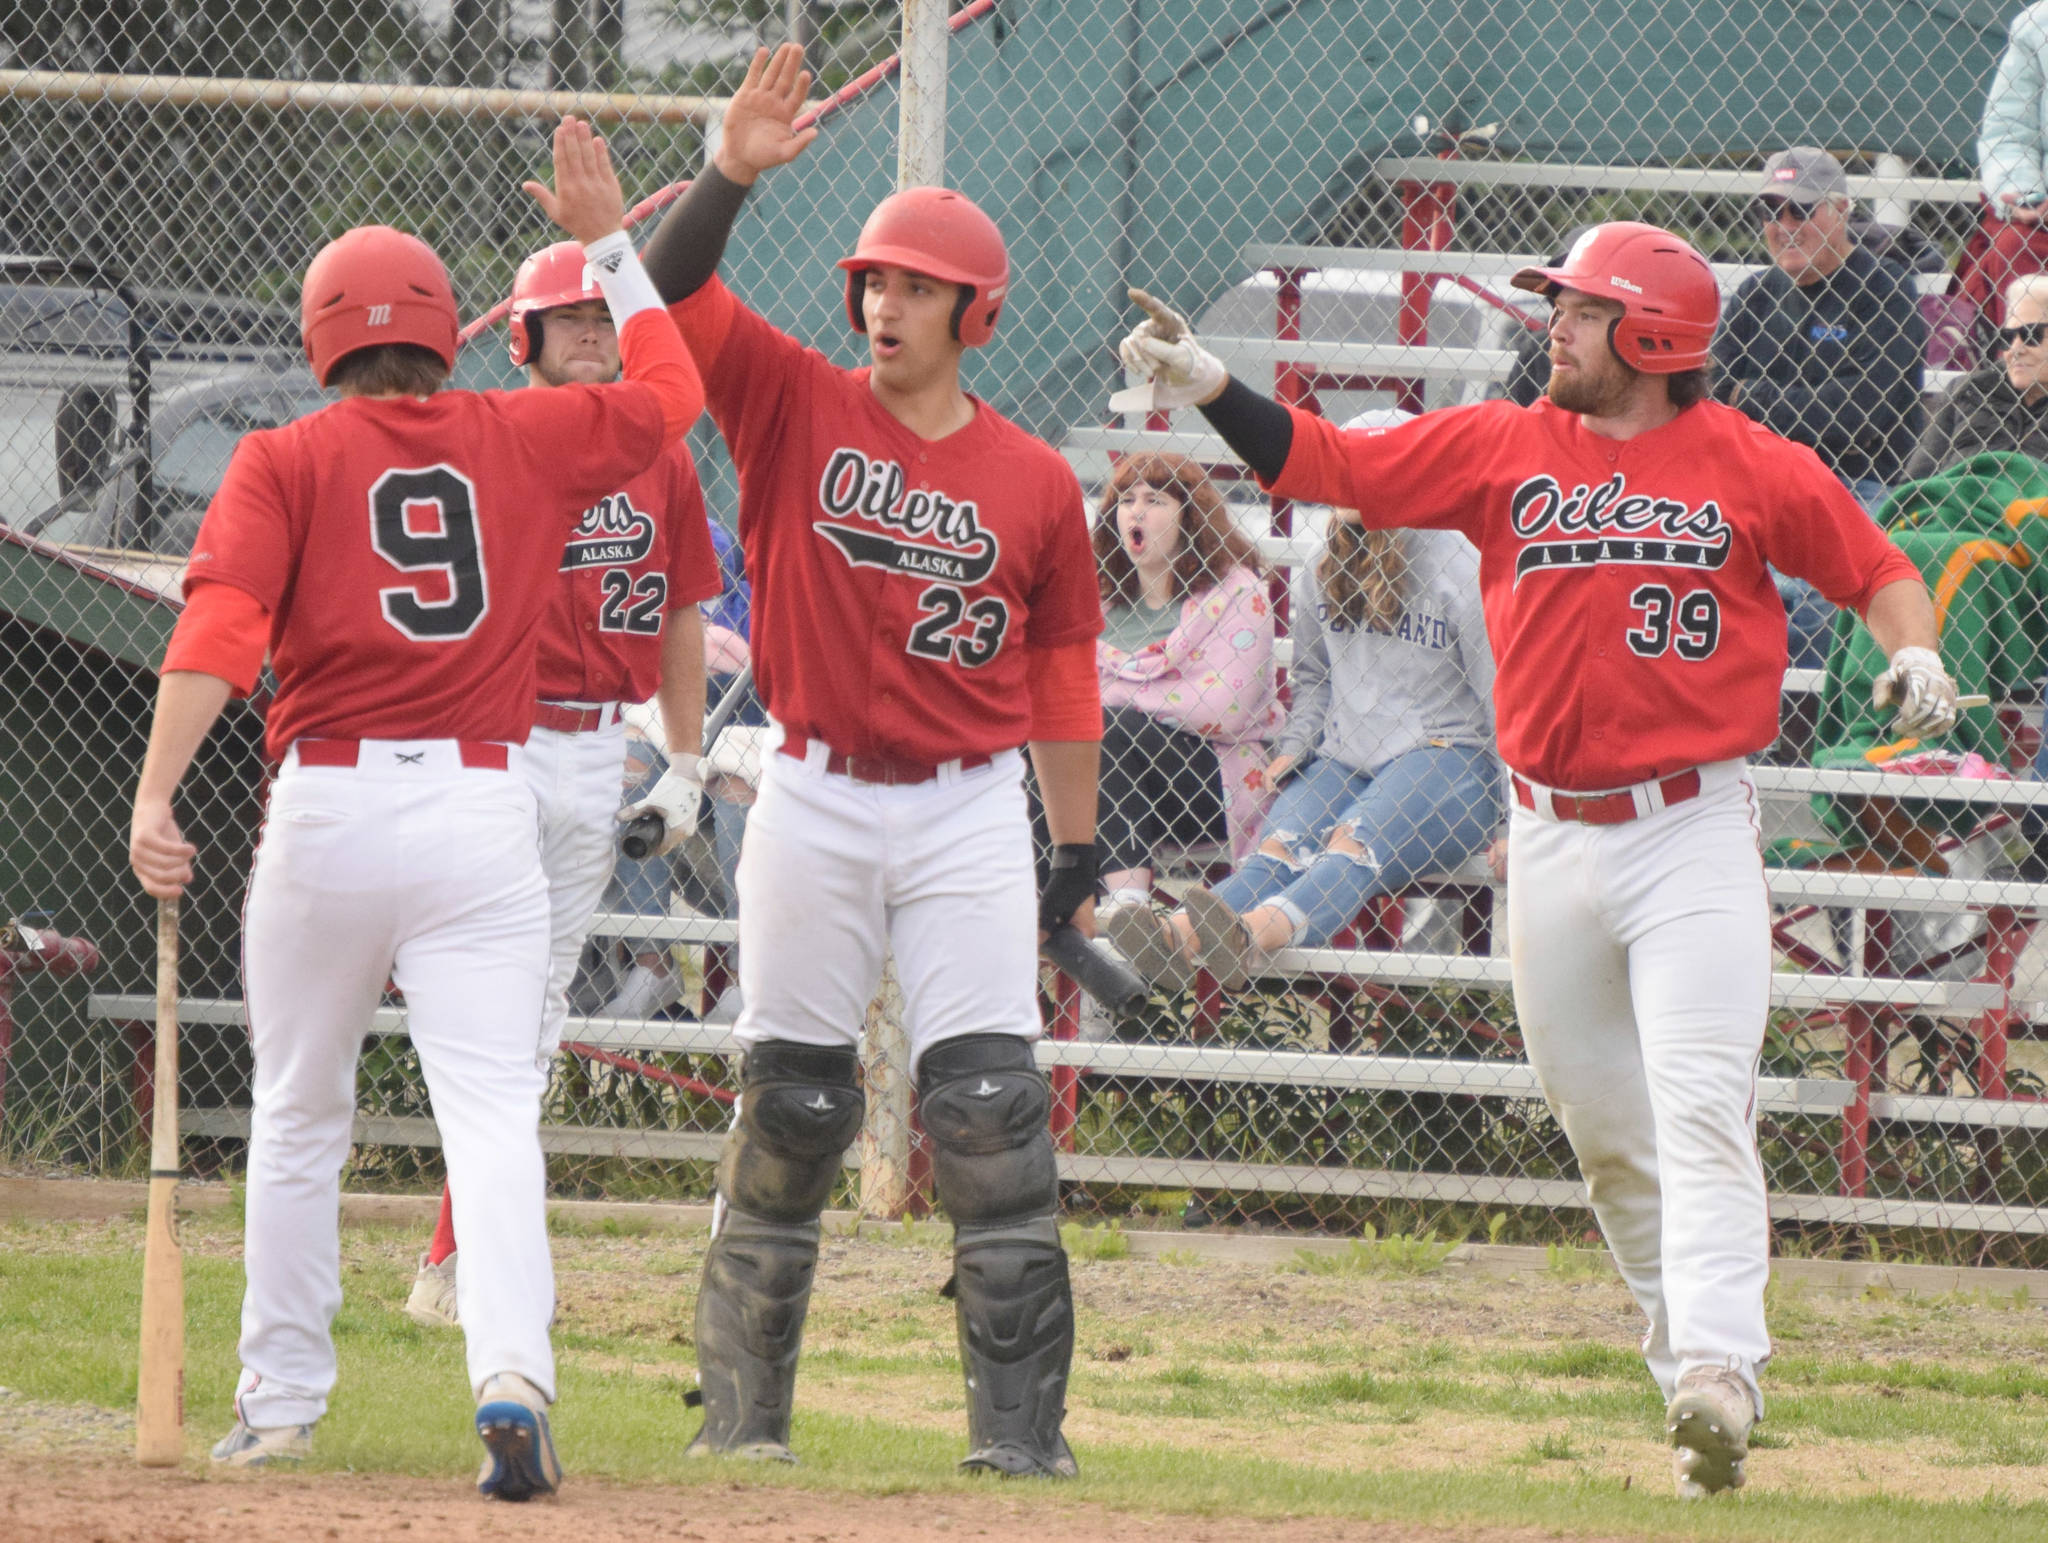 The Peninsula Oilers celebrate a two-run double by Bryce Marsh against the Anchorage Bucs on Tuesday, June 29, 2021, at Coral Seymour Memorial Park in Kenai, Alaska. (Photo by Jeff Helminiak/Peninsula Clarion)